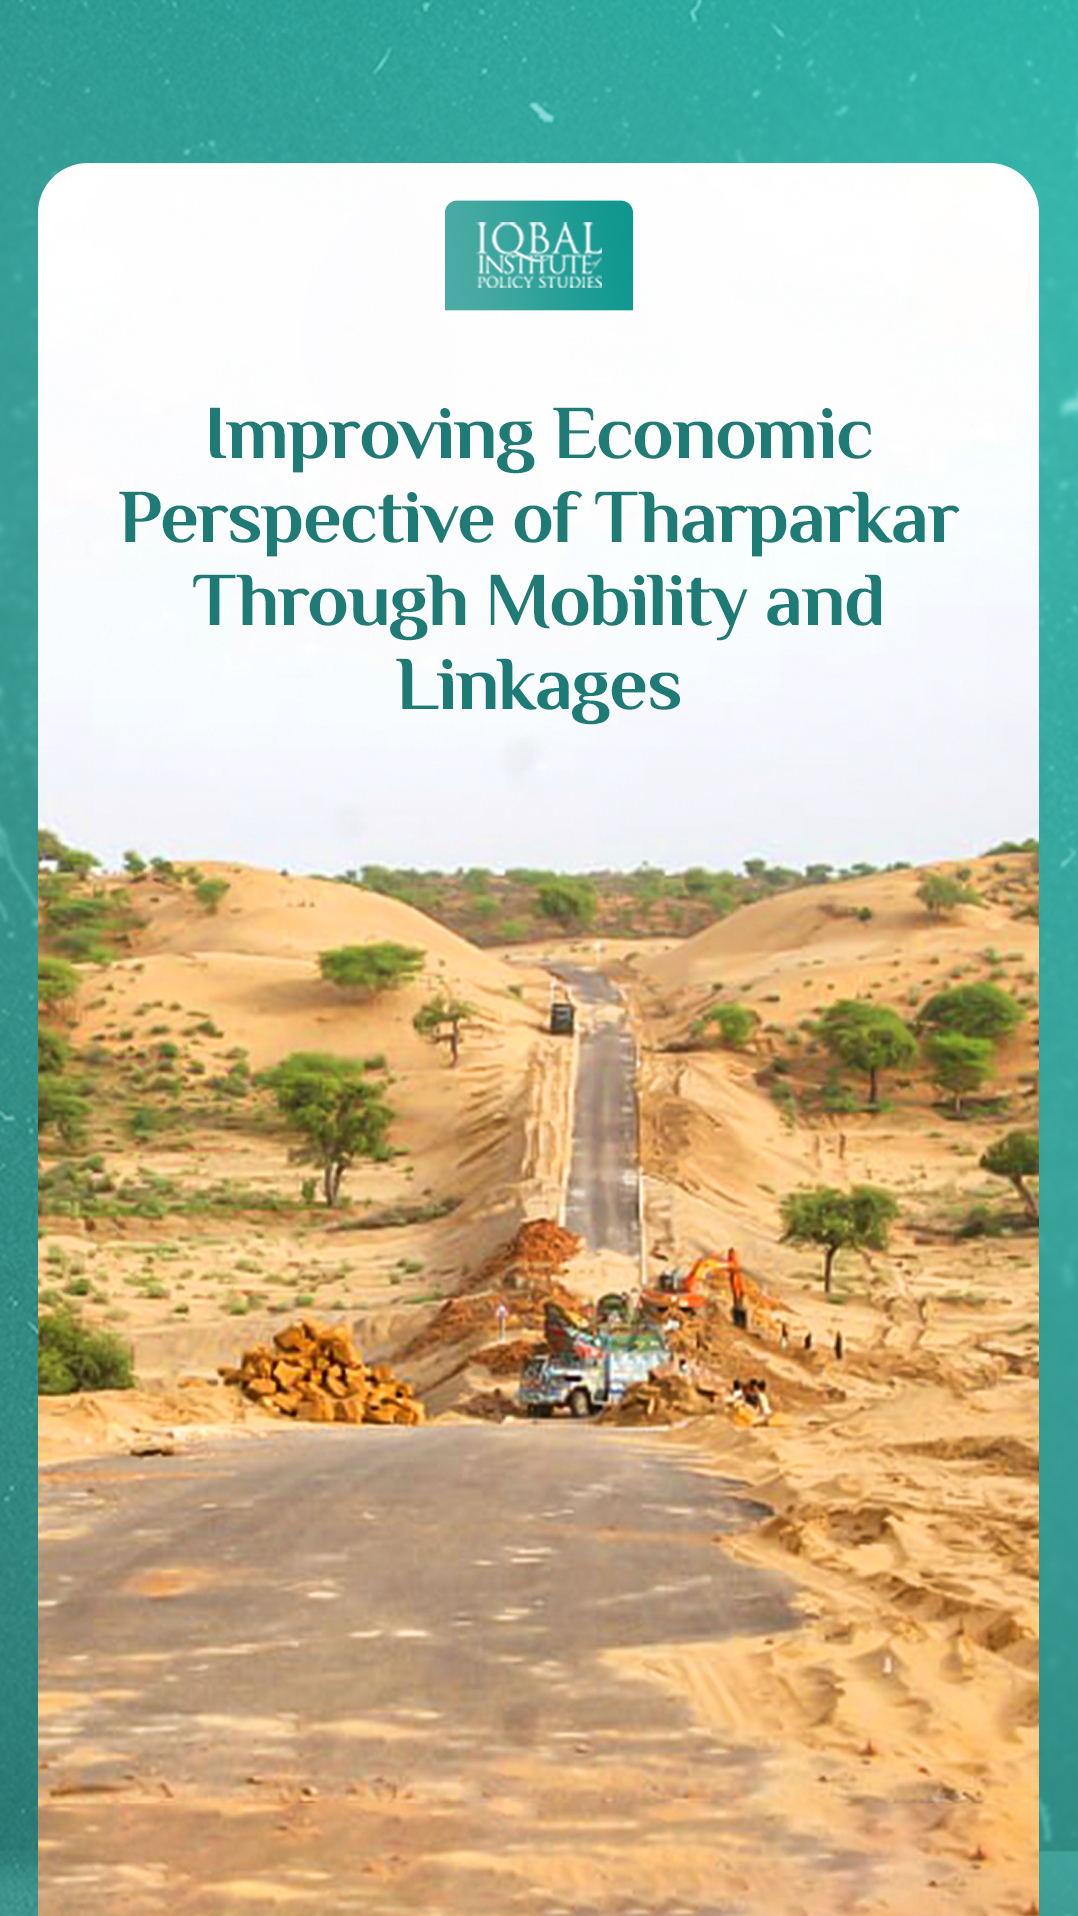 Improving Economic Perspective of Tharparkar Through Mobility and Linkages